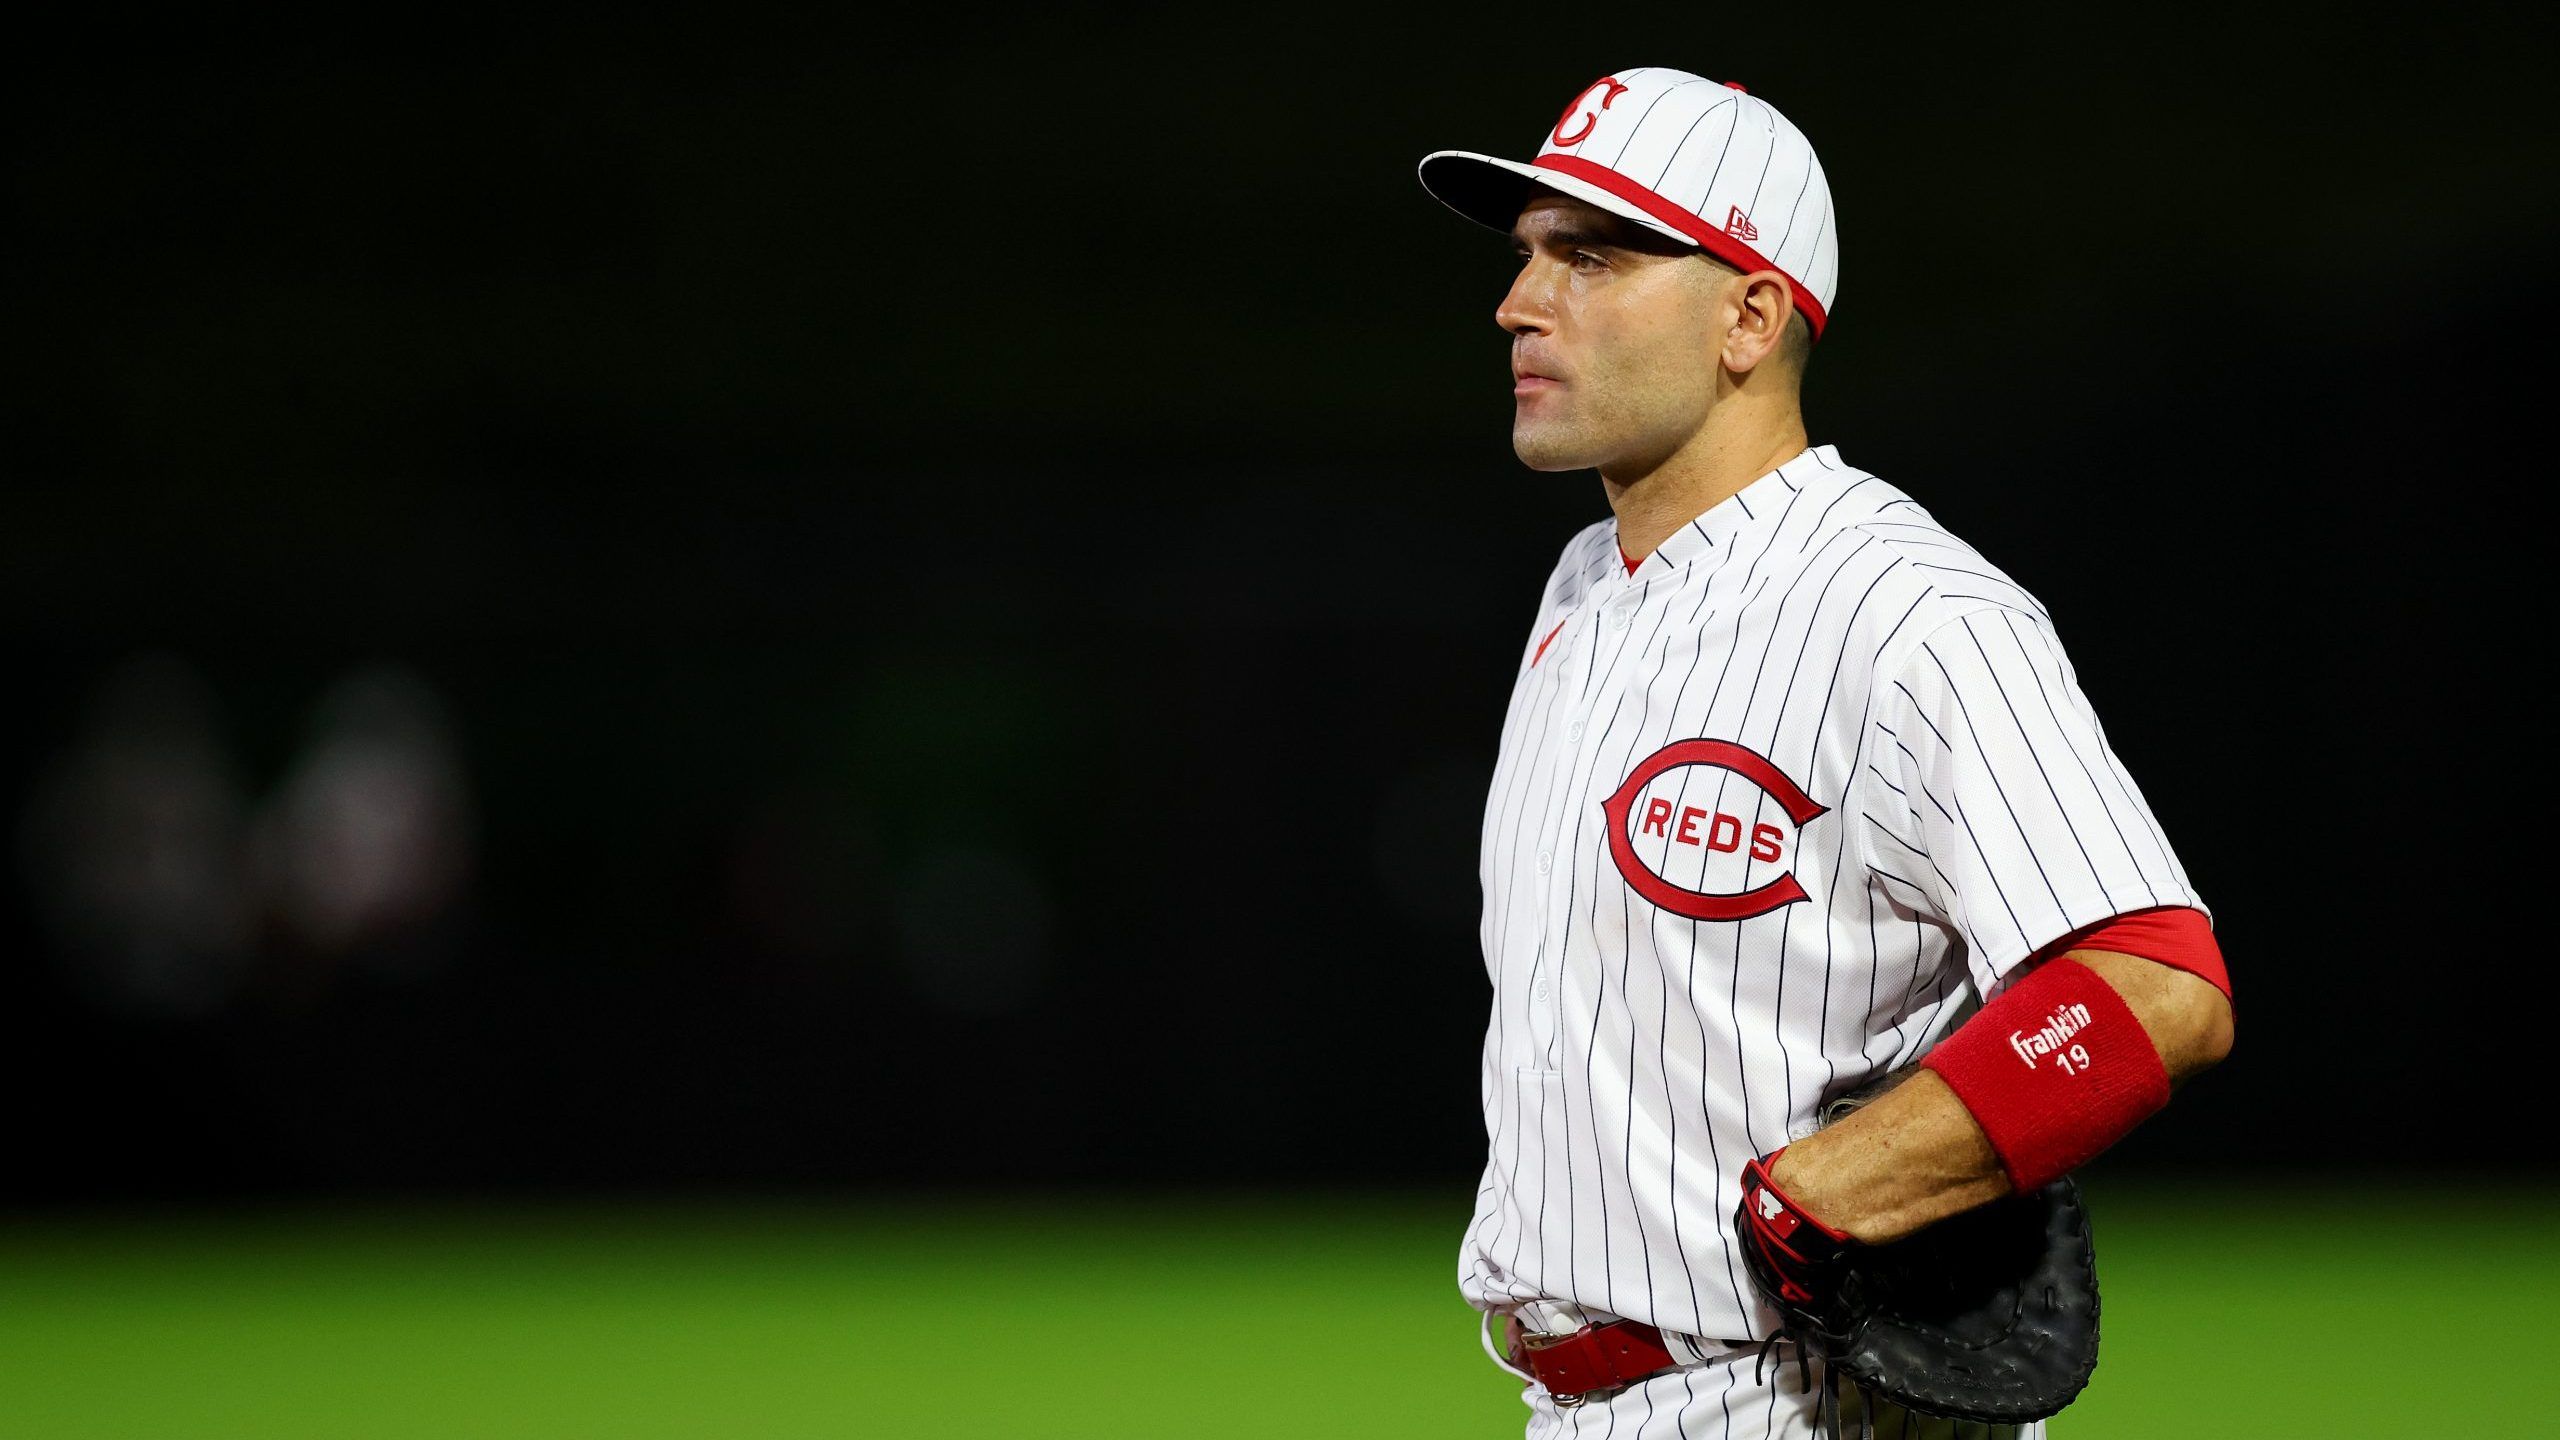 Joey Votto #19 of the Cincinnati Reds looks on during the eighth inning of the game against the Chicago Cubs at Field of Dreams on August 11, 2022 in Dyersville, Iowa. (Photo by Michael Reaves/Getty Images)